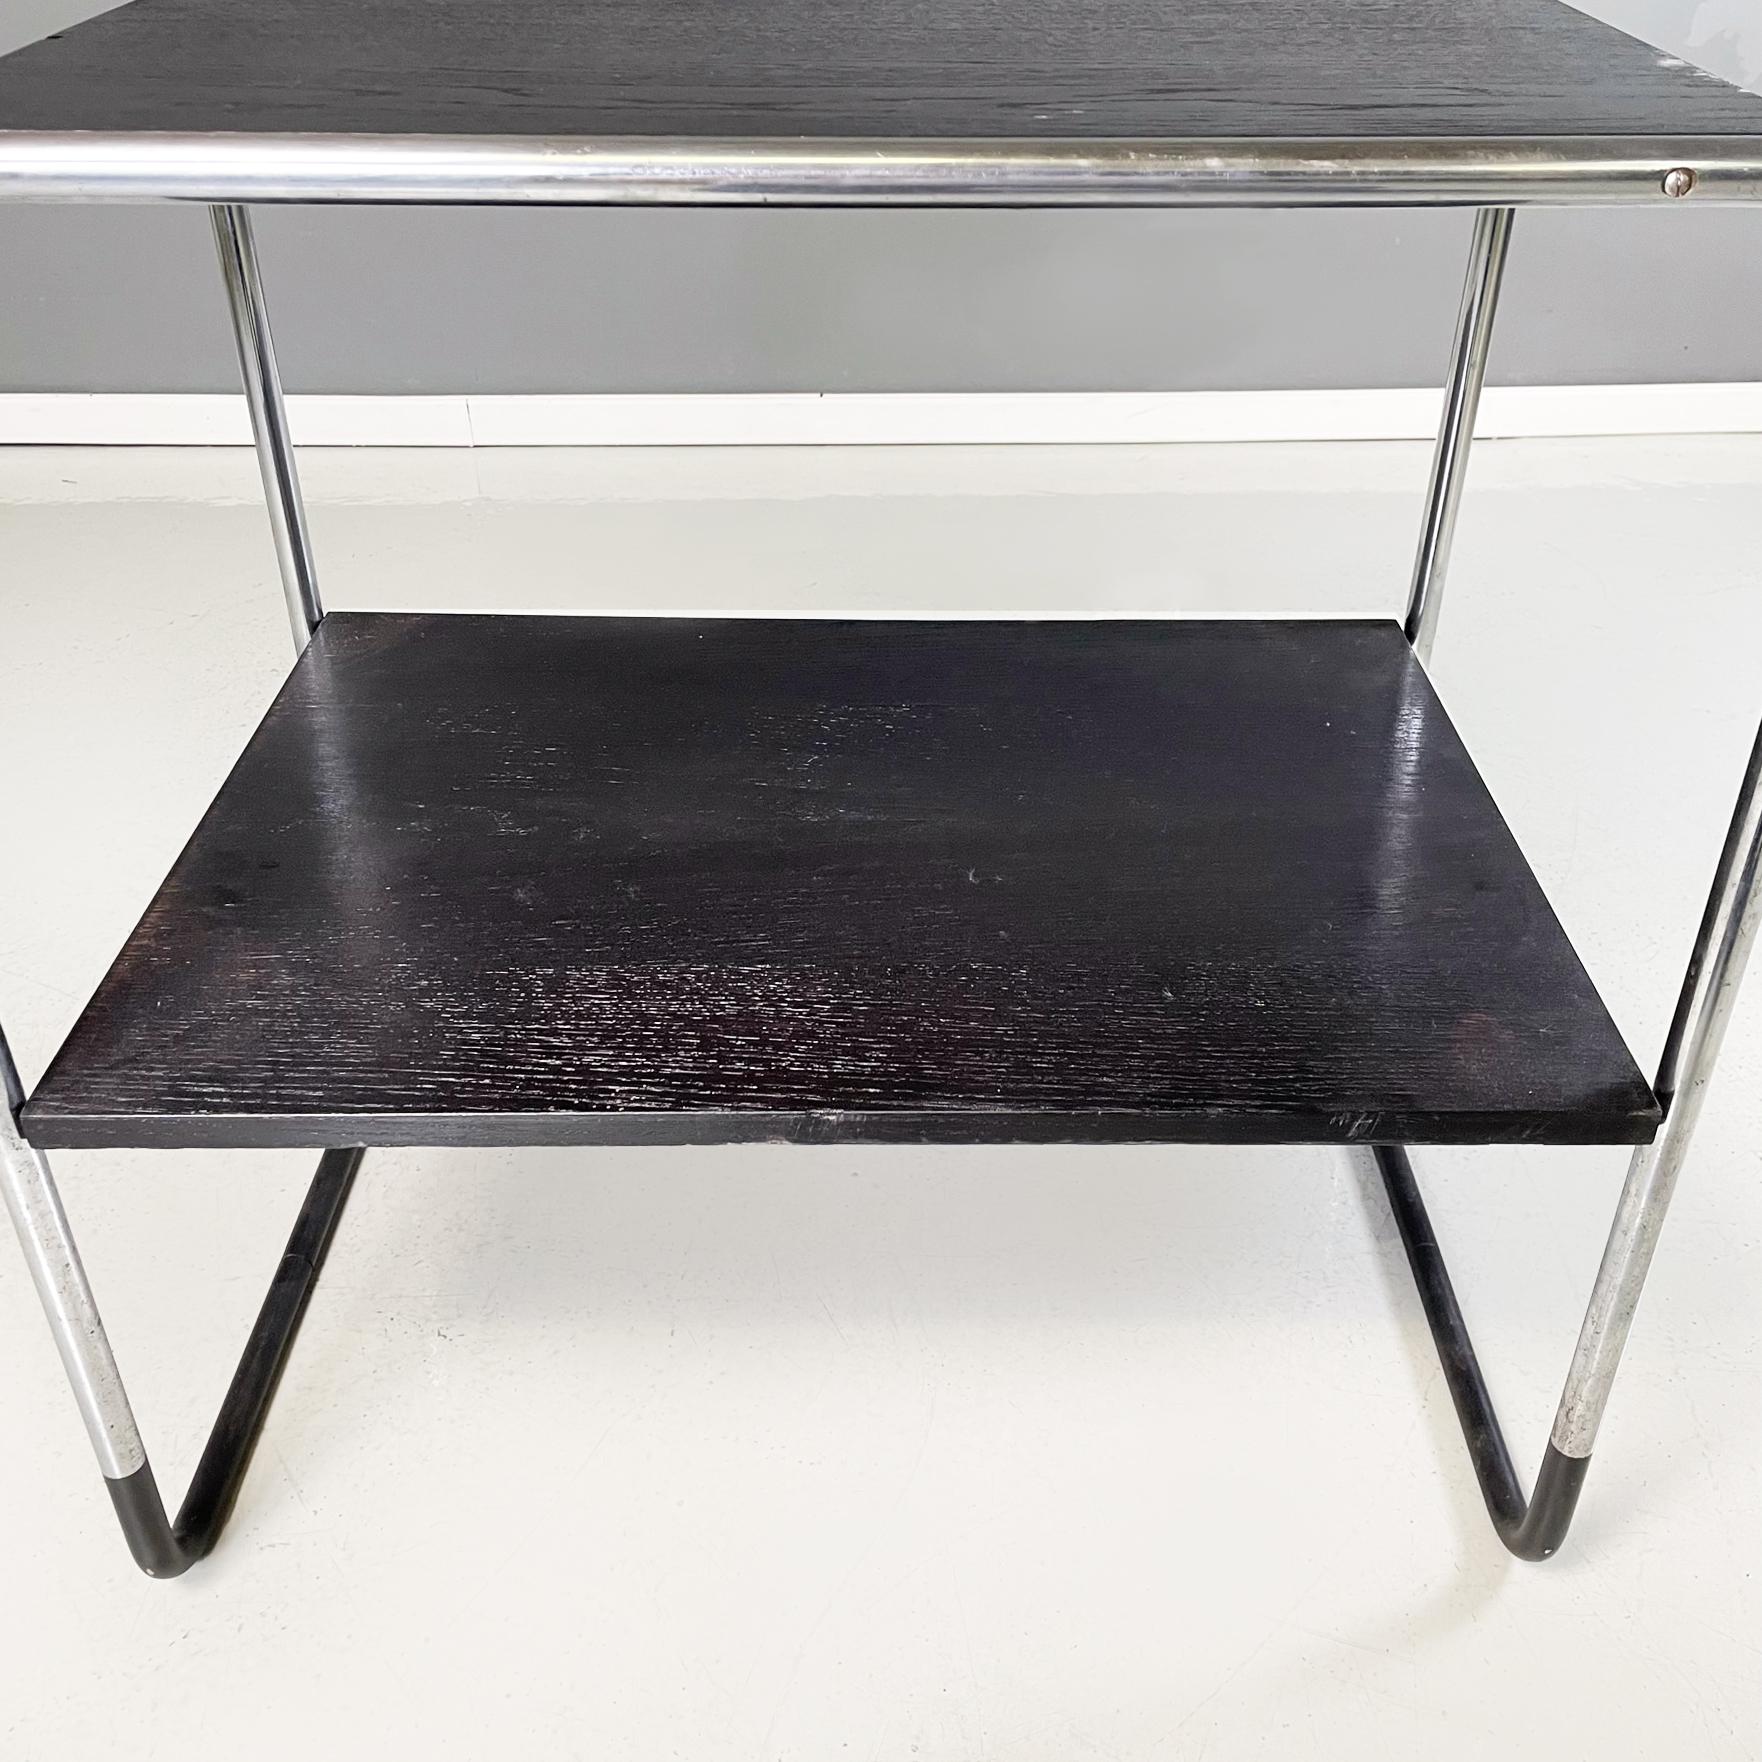 Late 20th Century German Black Wood and Steel Coffee Table by Arnold Bauhaus Collection, 1980s For Sale